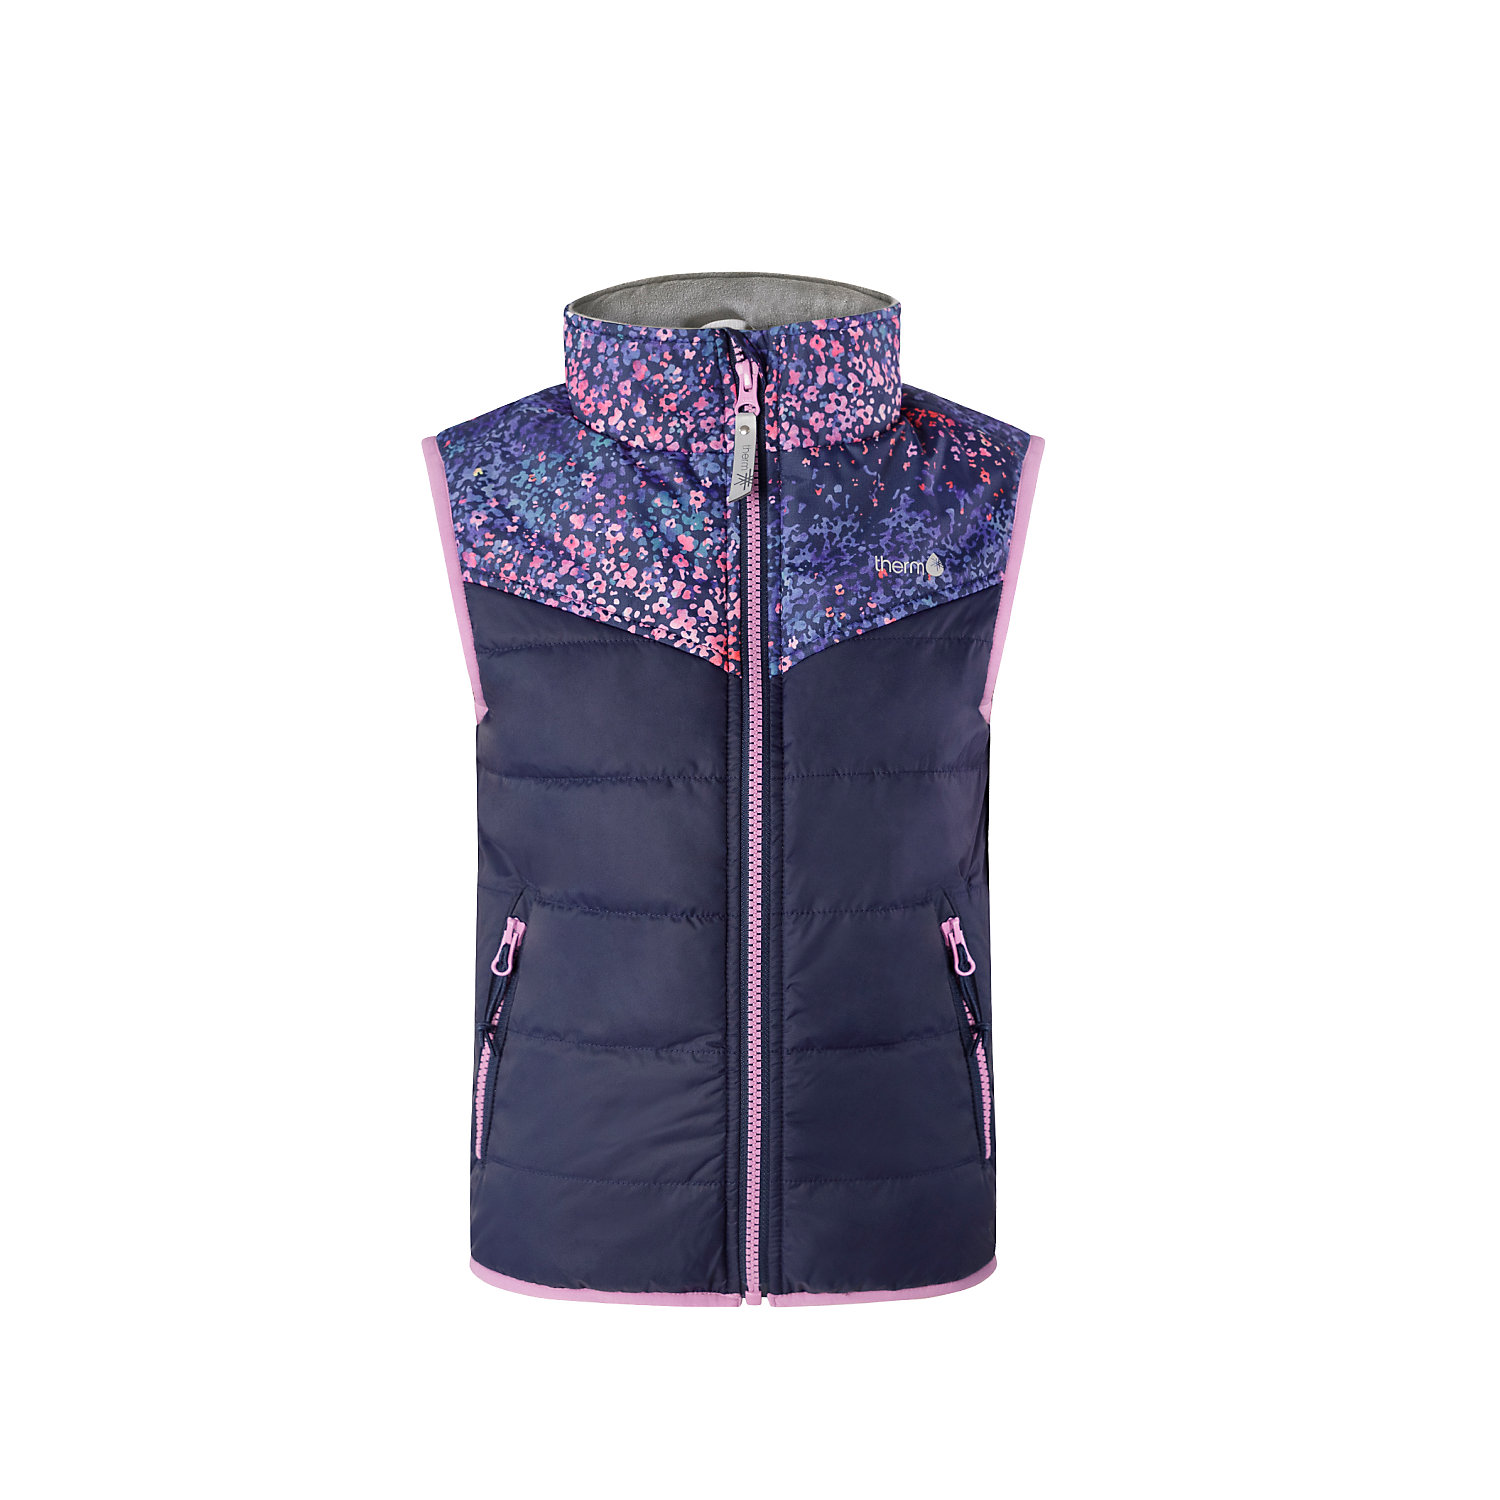 Therm Kids Hydracloud Puffer Vest